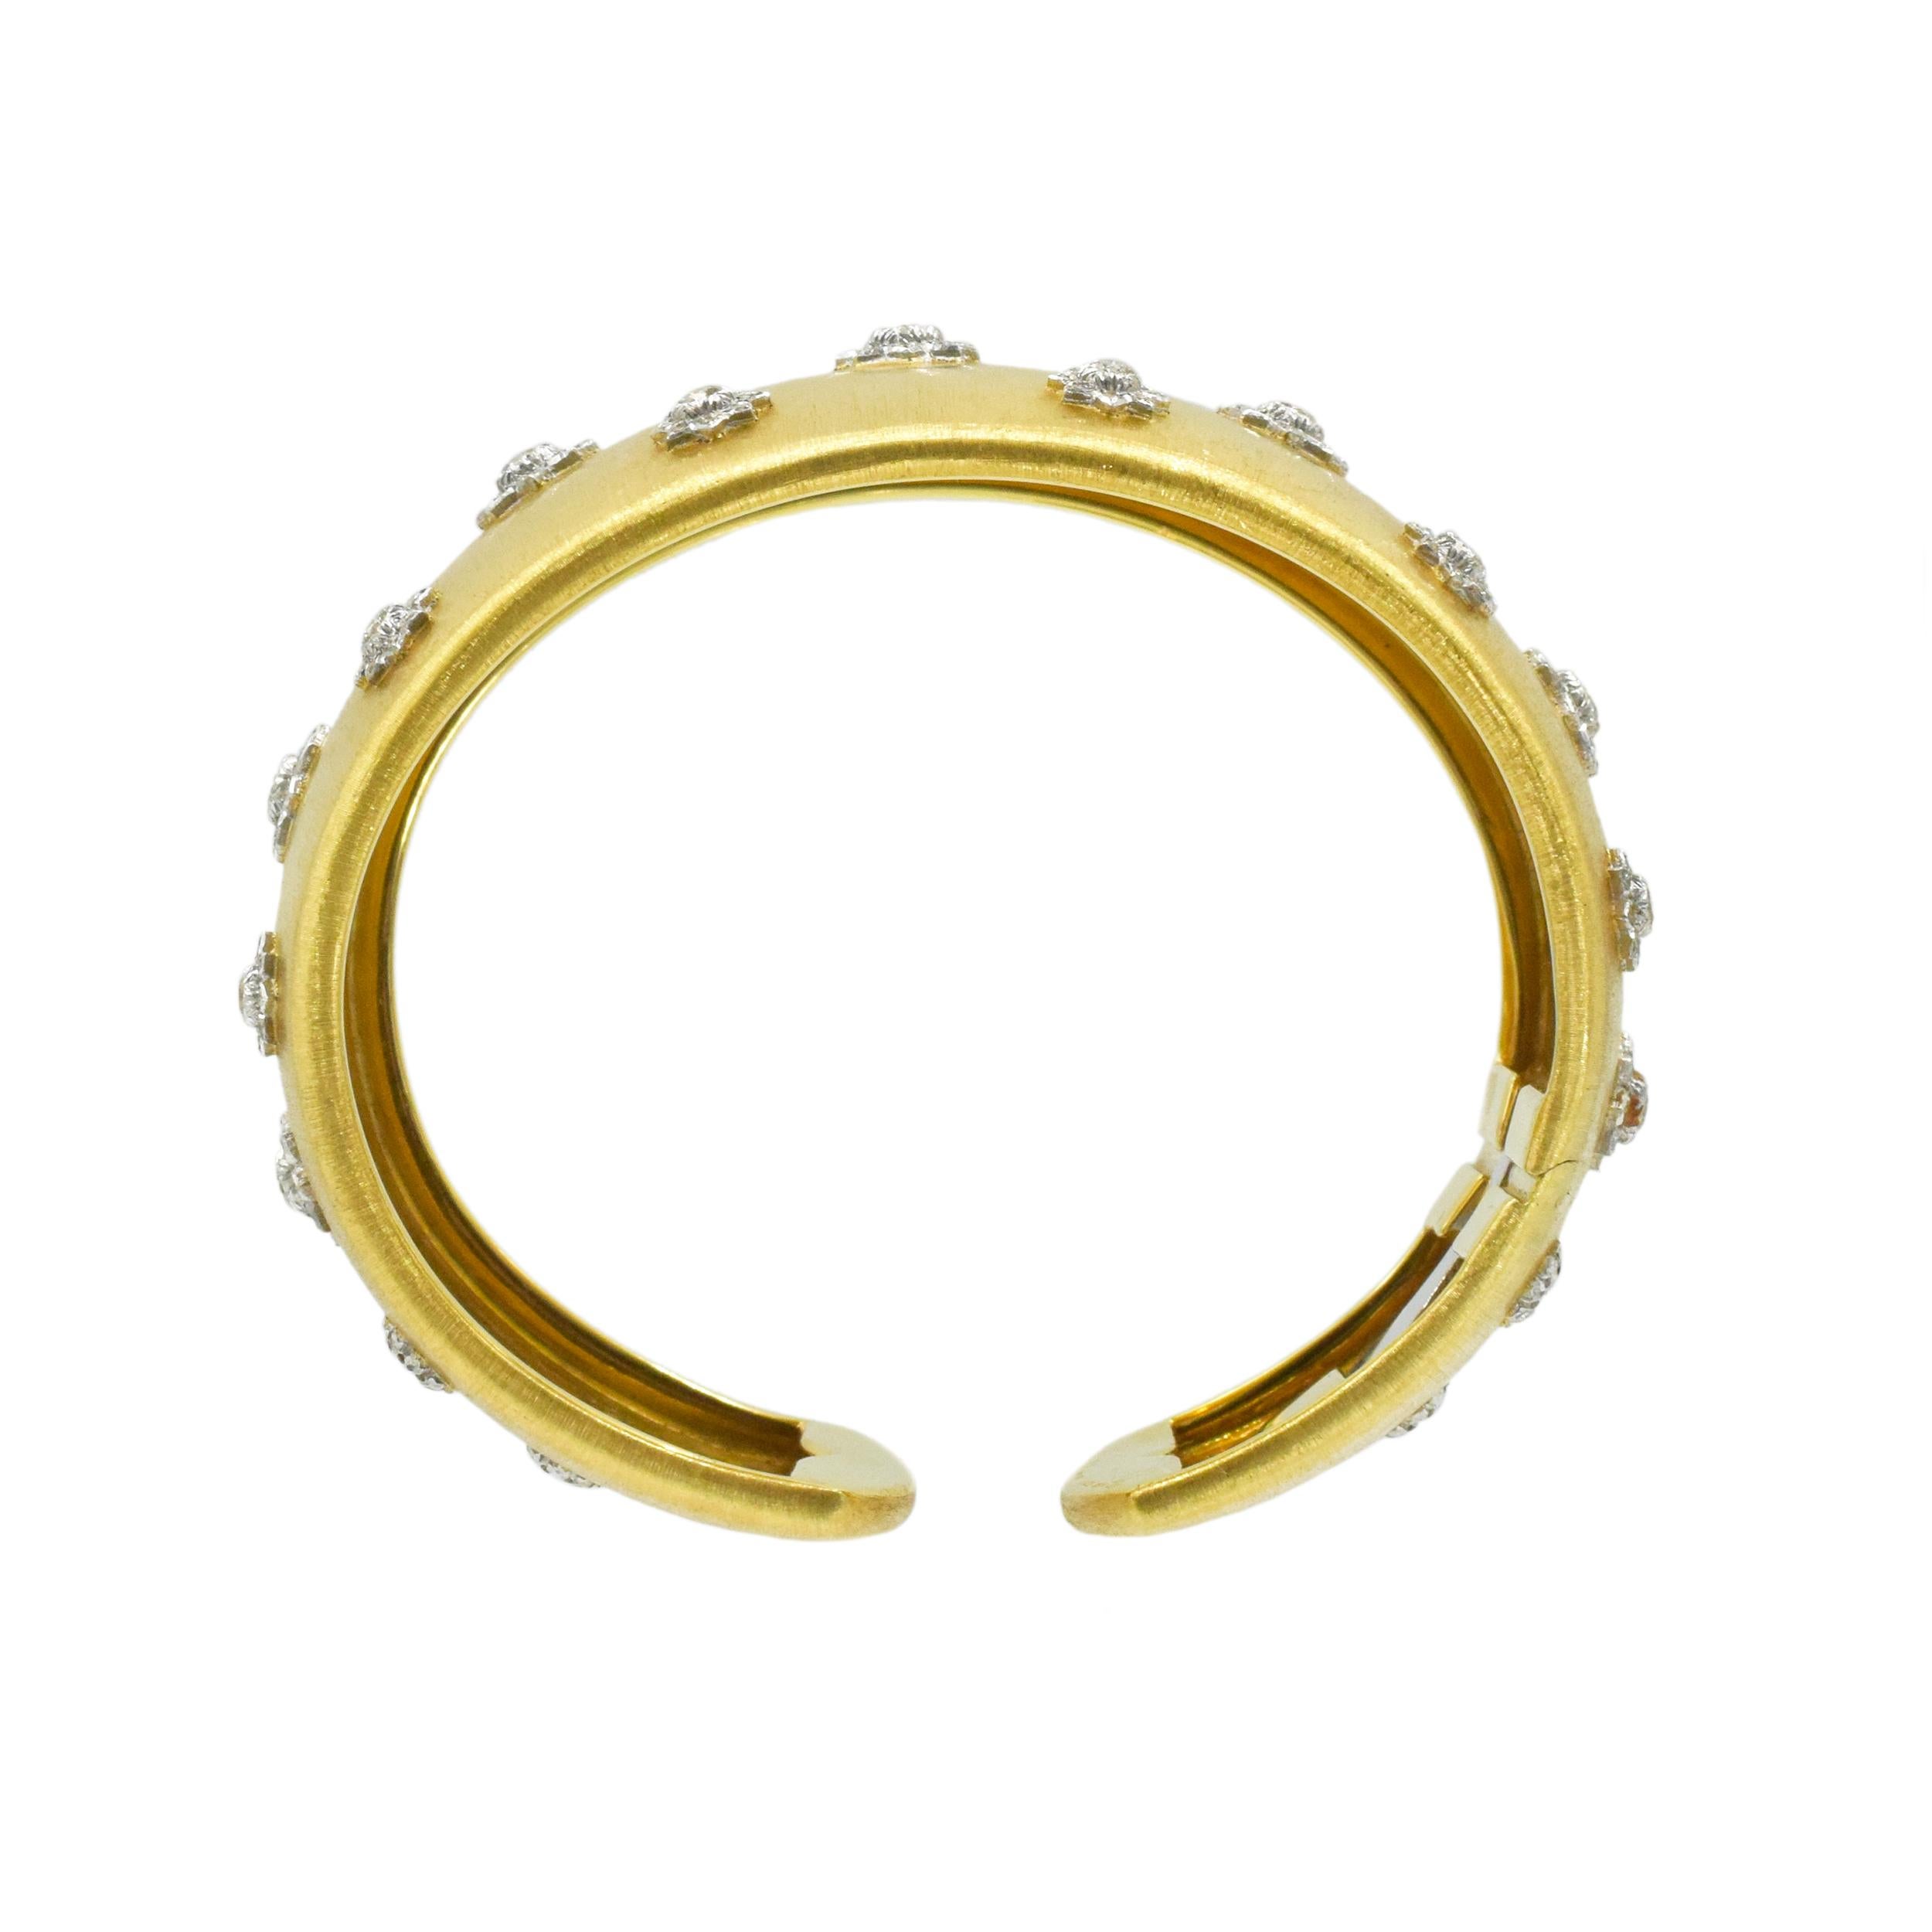 Buccellati 'Macri' Gold Bracelet and Ear Clip Suite In Excellent Condition For Sale In New York, NY